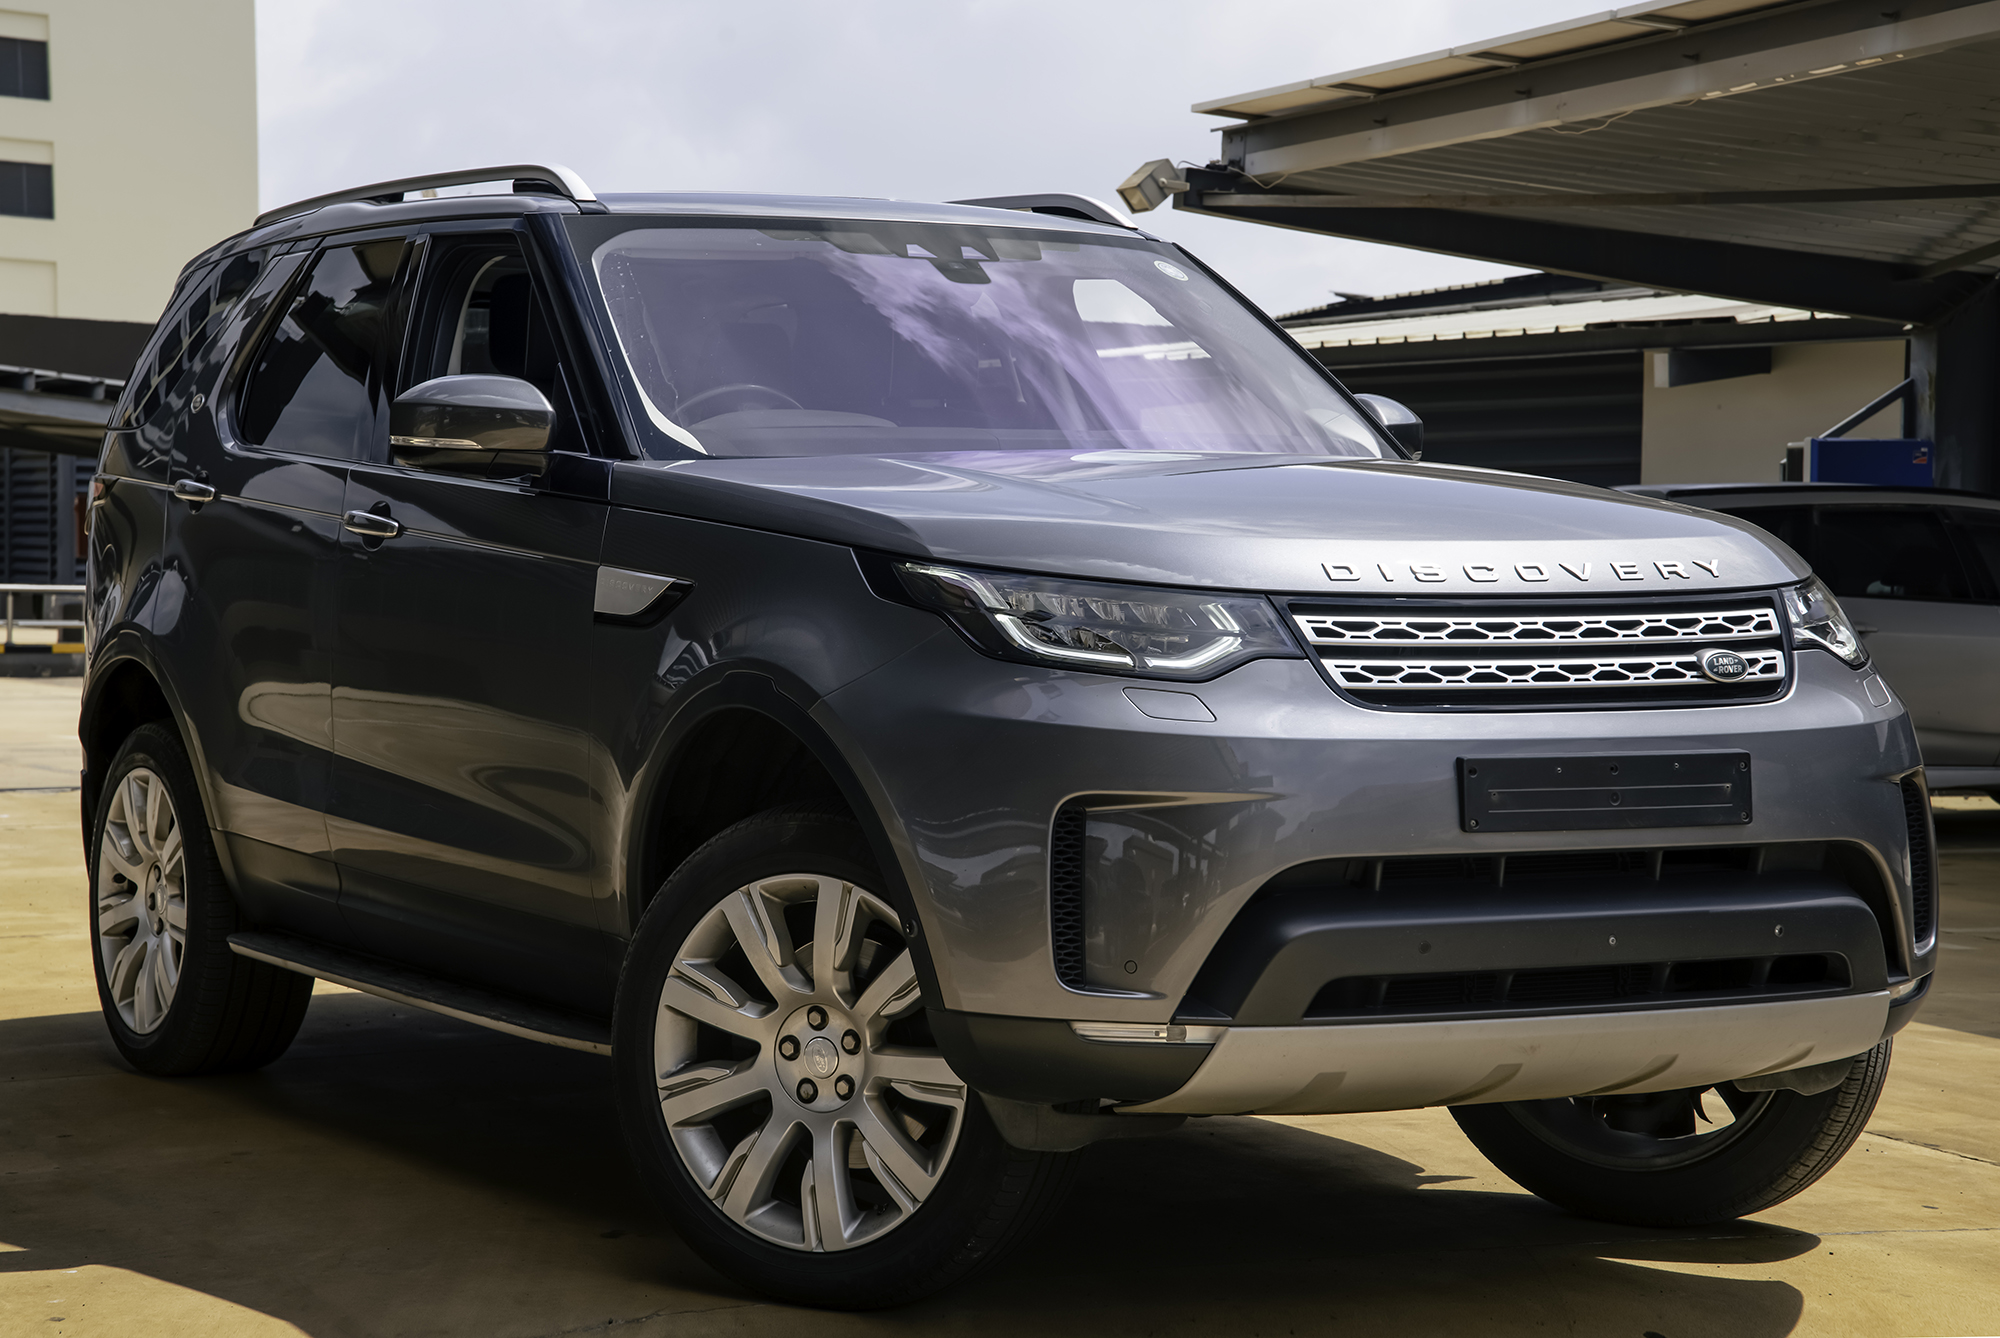 Landrover Discovery 5 Luxury HSE by Eleven Motors